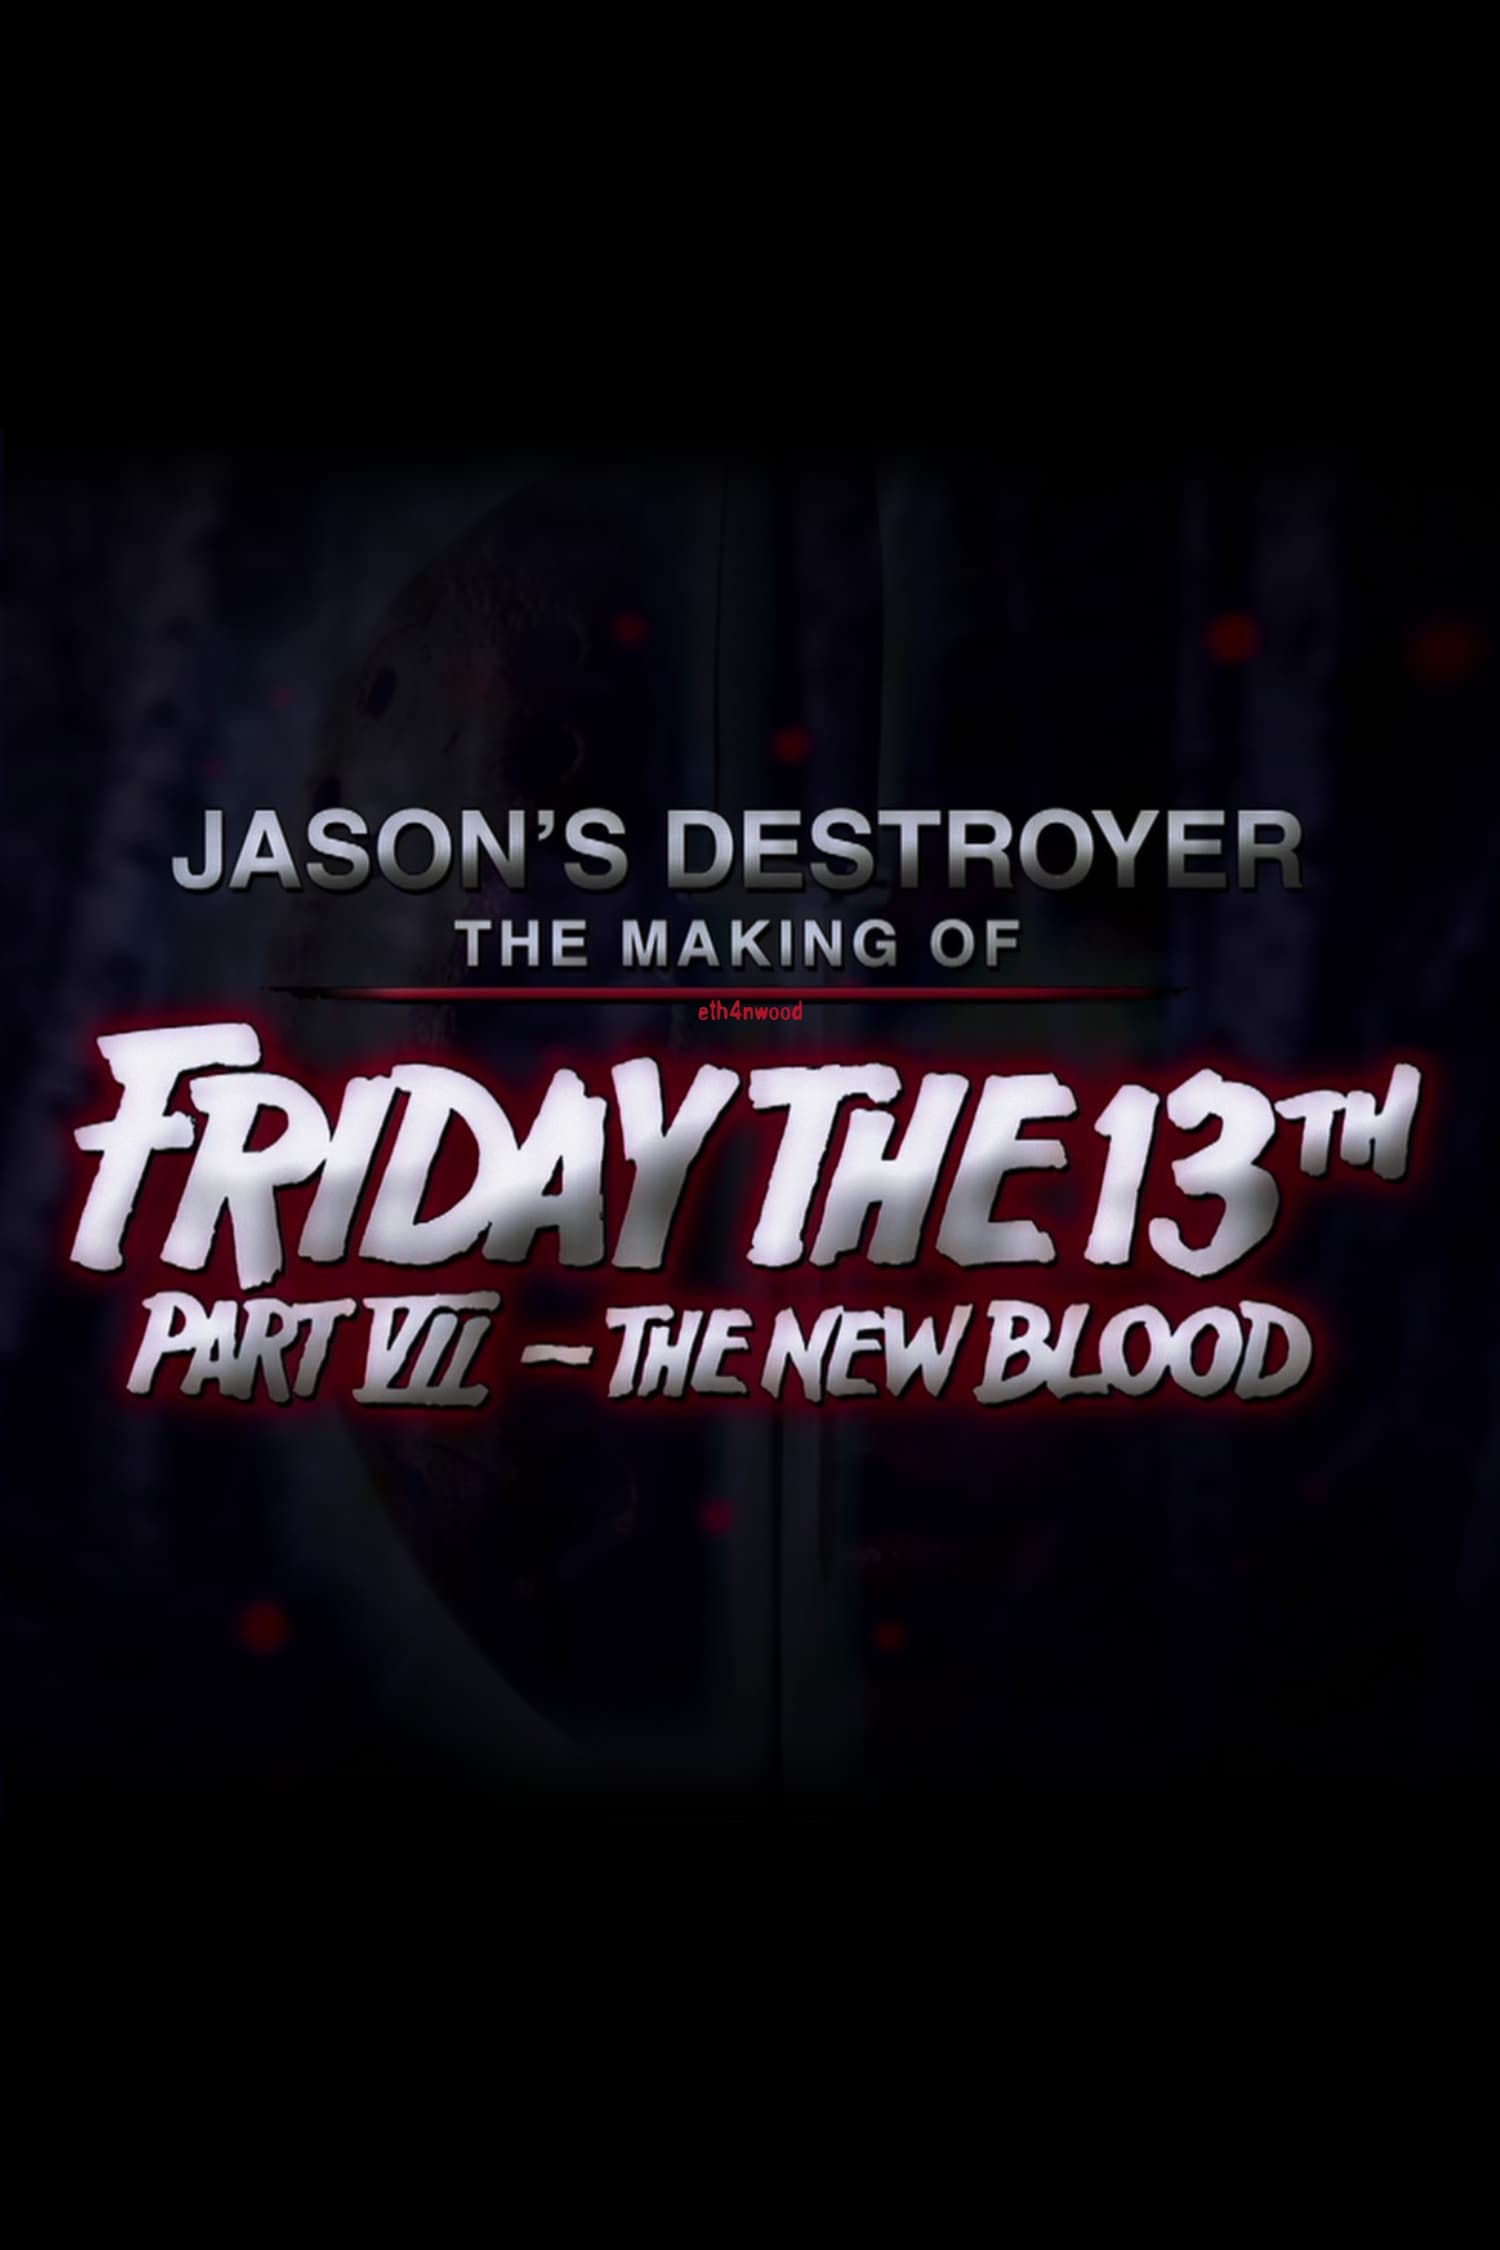 Jason's Destroyer: The Making of Friday the 13th Part VII - The New Blood